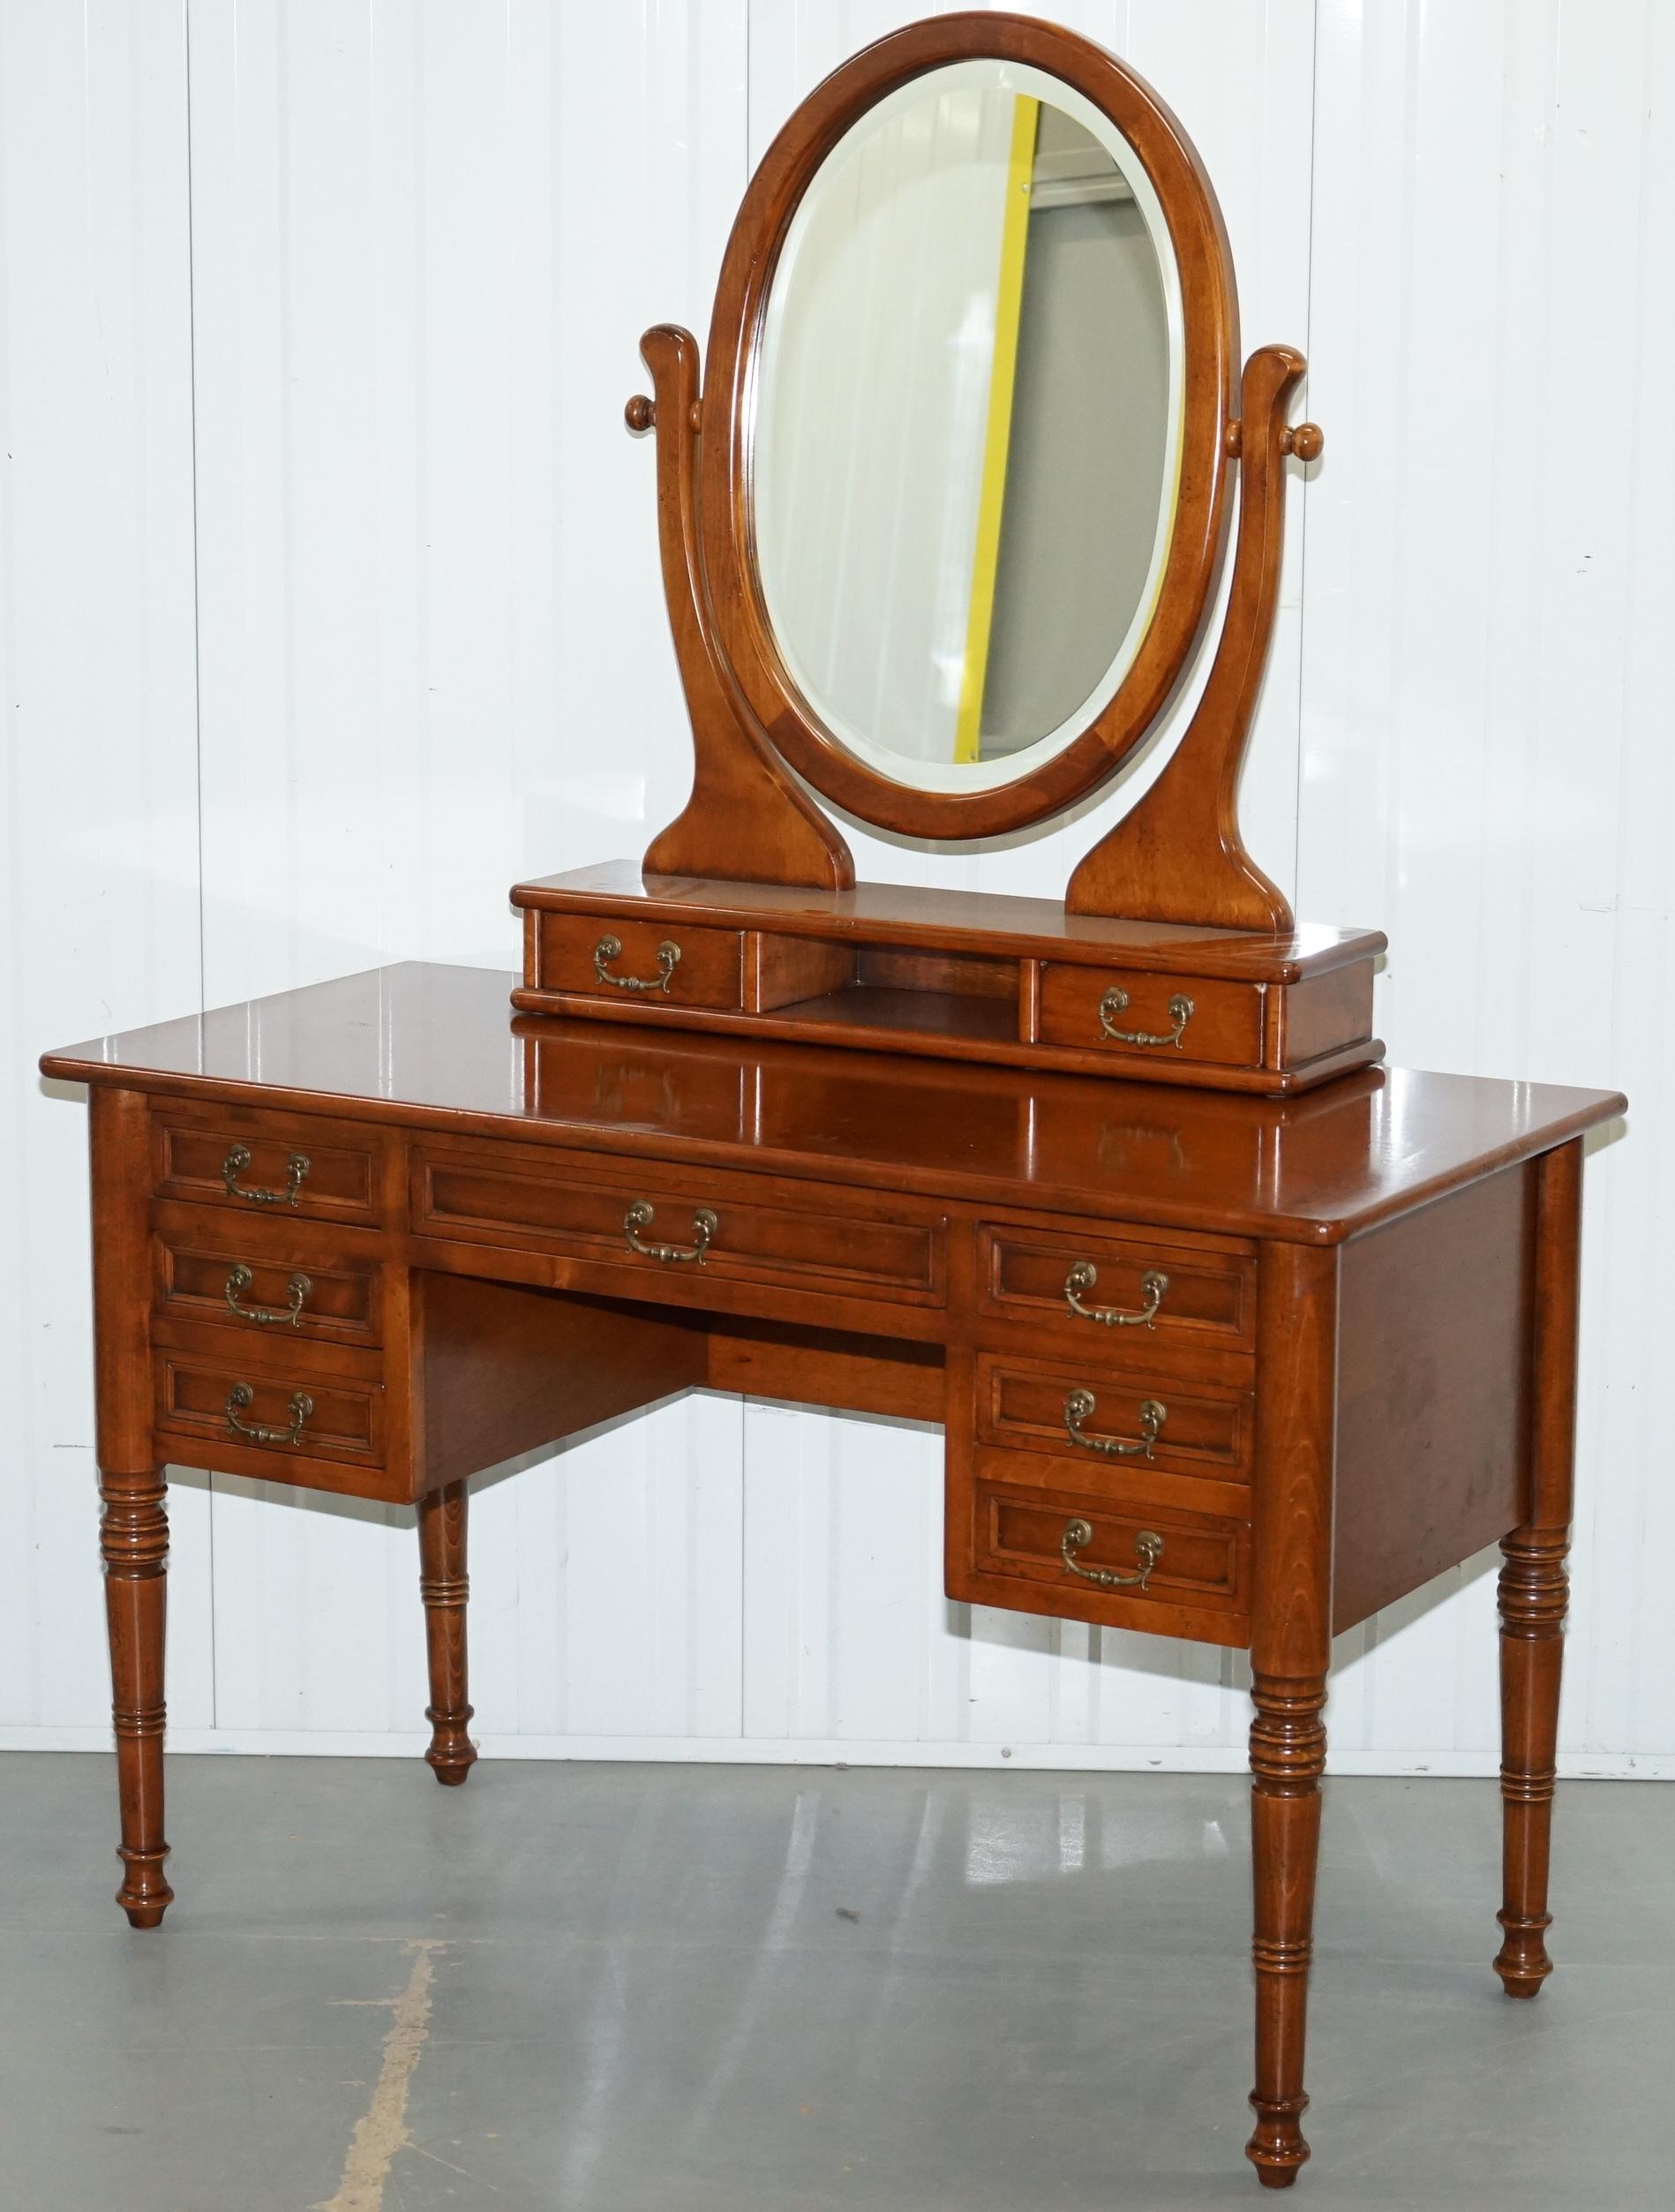 Victorian Dressing Table Mirror and Stool Made in Italy by Consorzio Mobili Mahogany Frame